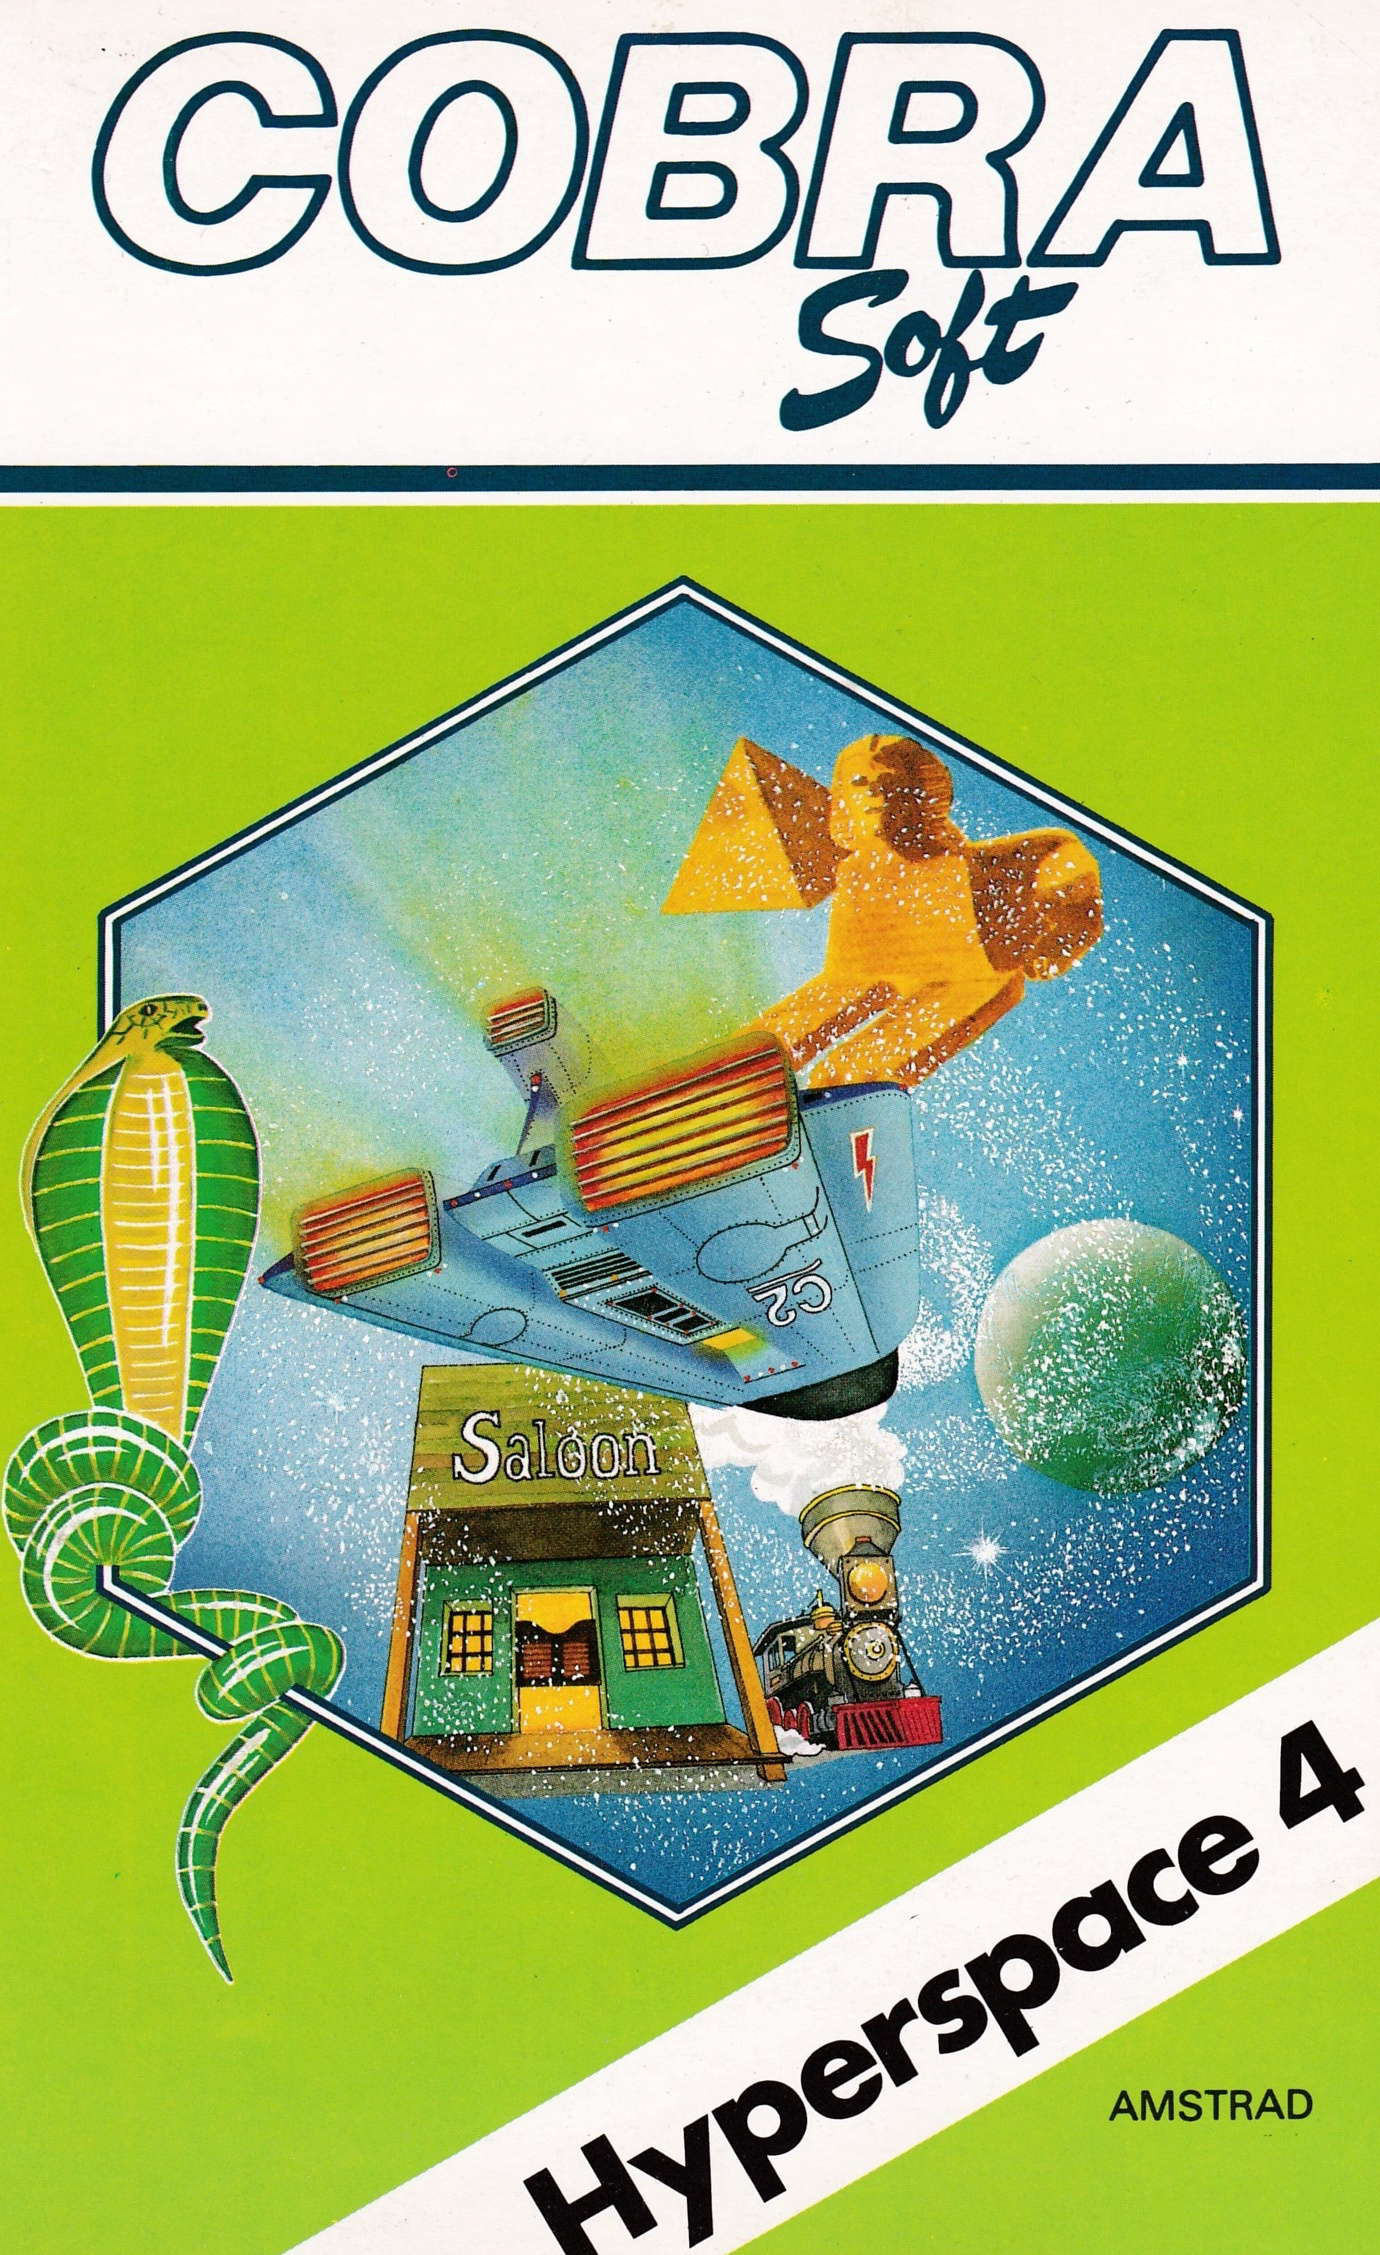 cover of the Amstrad CPC game Hyperspace 4  by GameBase CPC